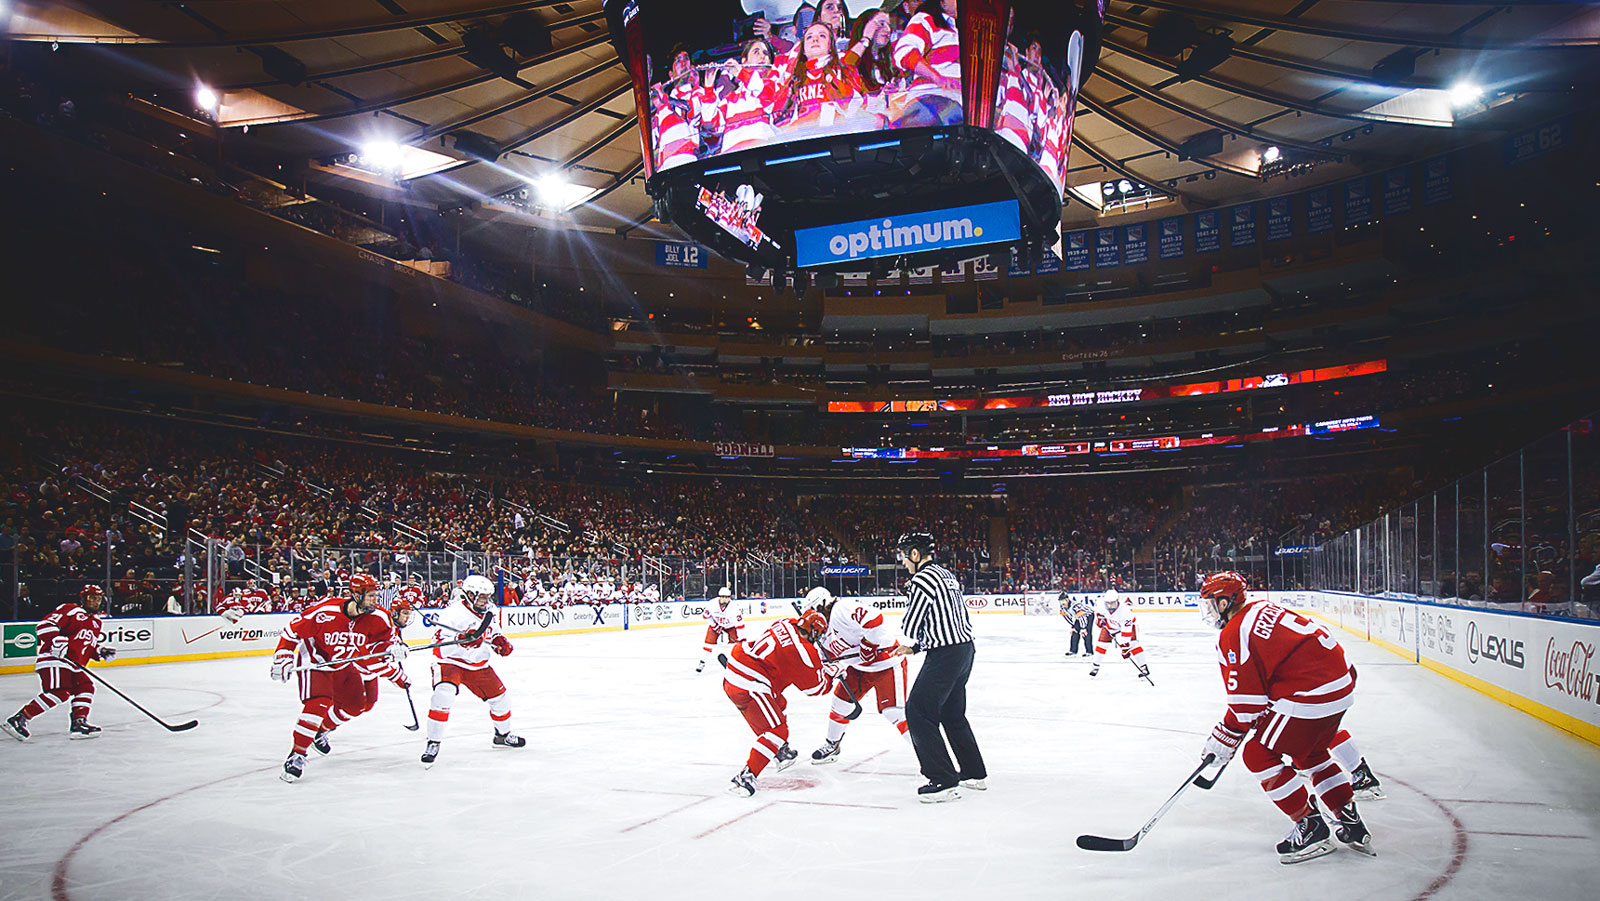 Cornell and Boston men's hockey teams playing the Red Hot Hockey game at Madison Square Garden